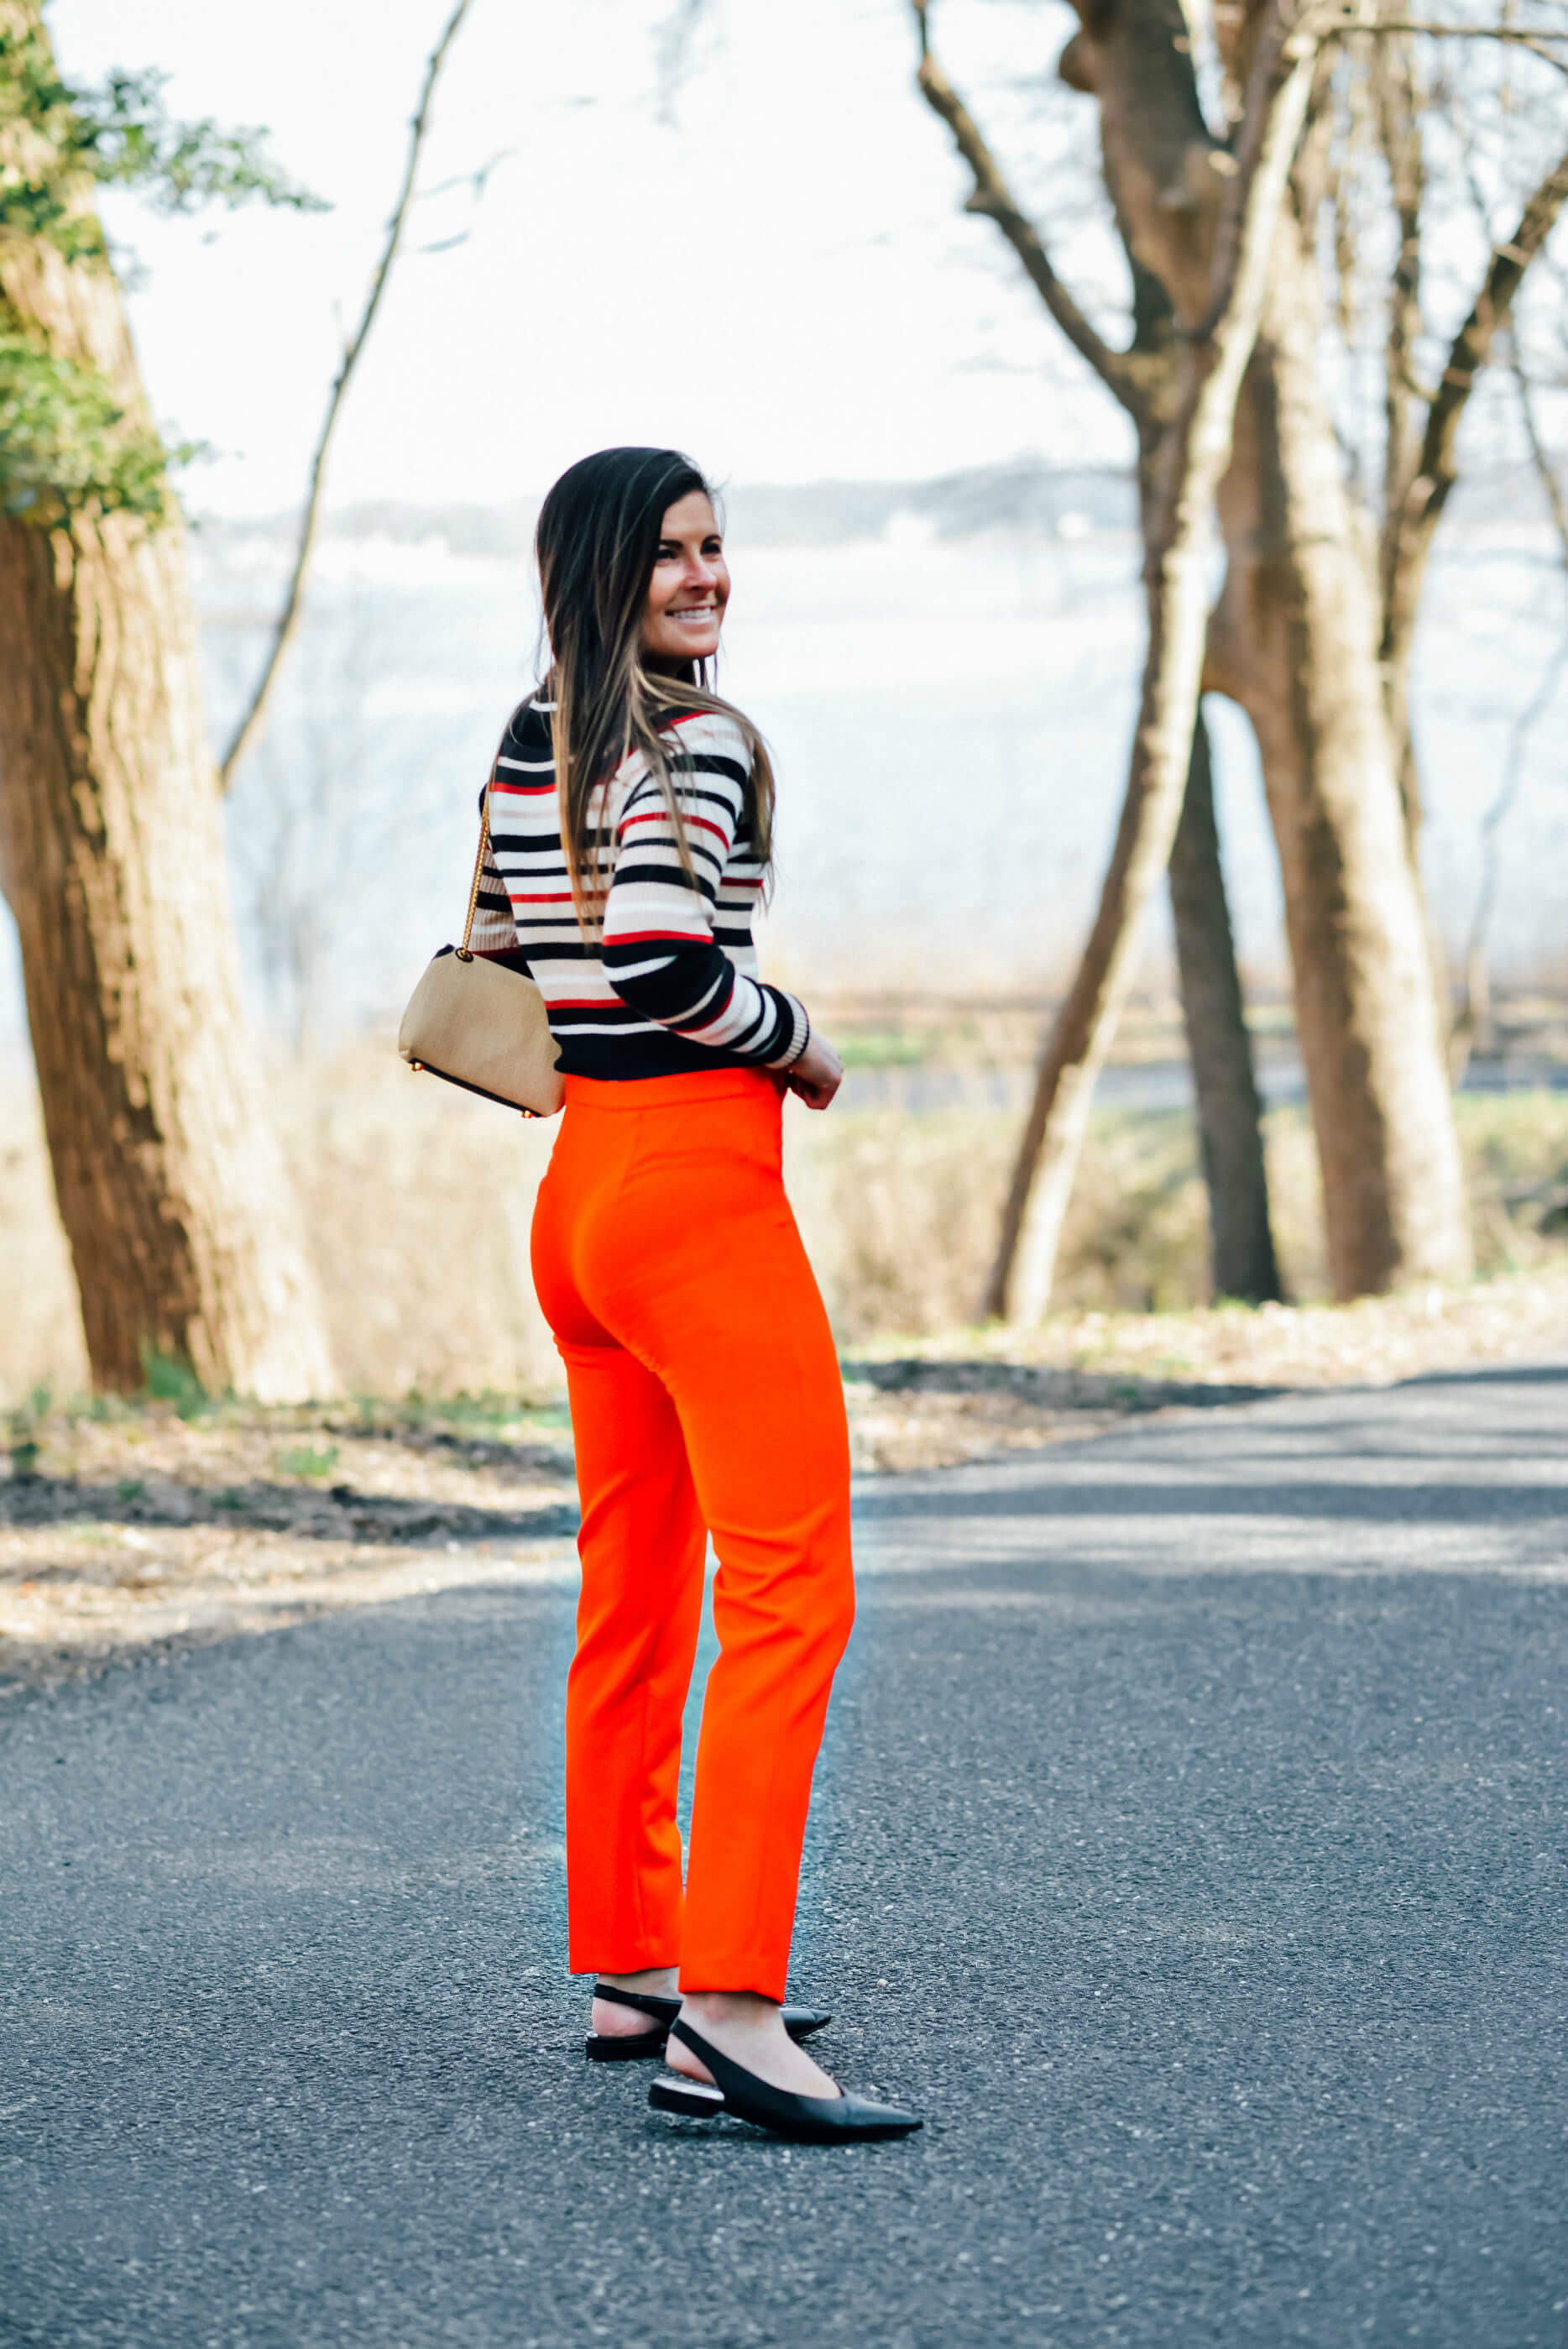 Milly Skinny High Waisted Red Pant, Striped Knit Sweater Top, Sam Edelman Black Slingback Flats, Business Casual Outfit, Spring Business Casual Outfit, Pop of Color Work Outfit, Tilden of To Be Bright